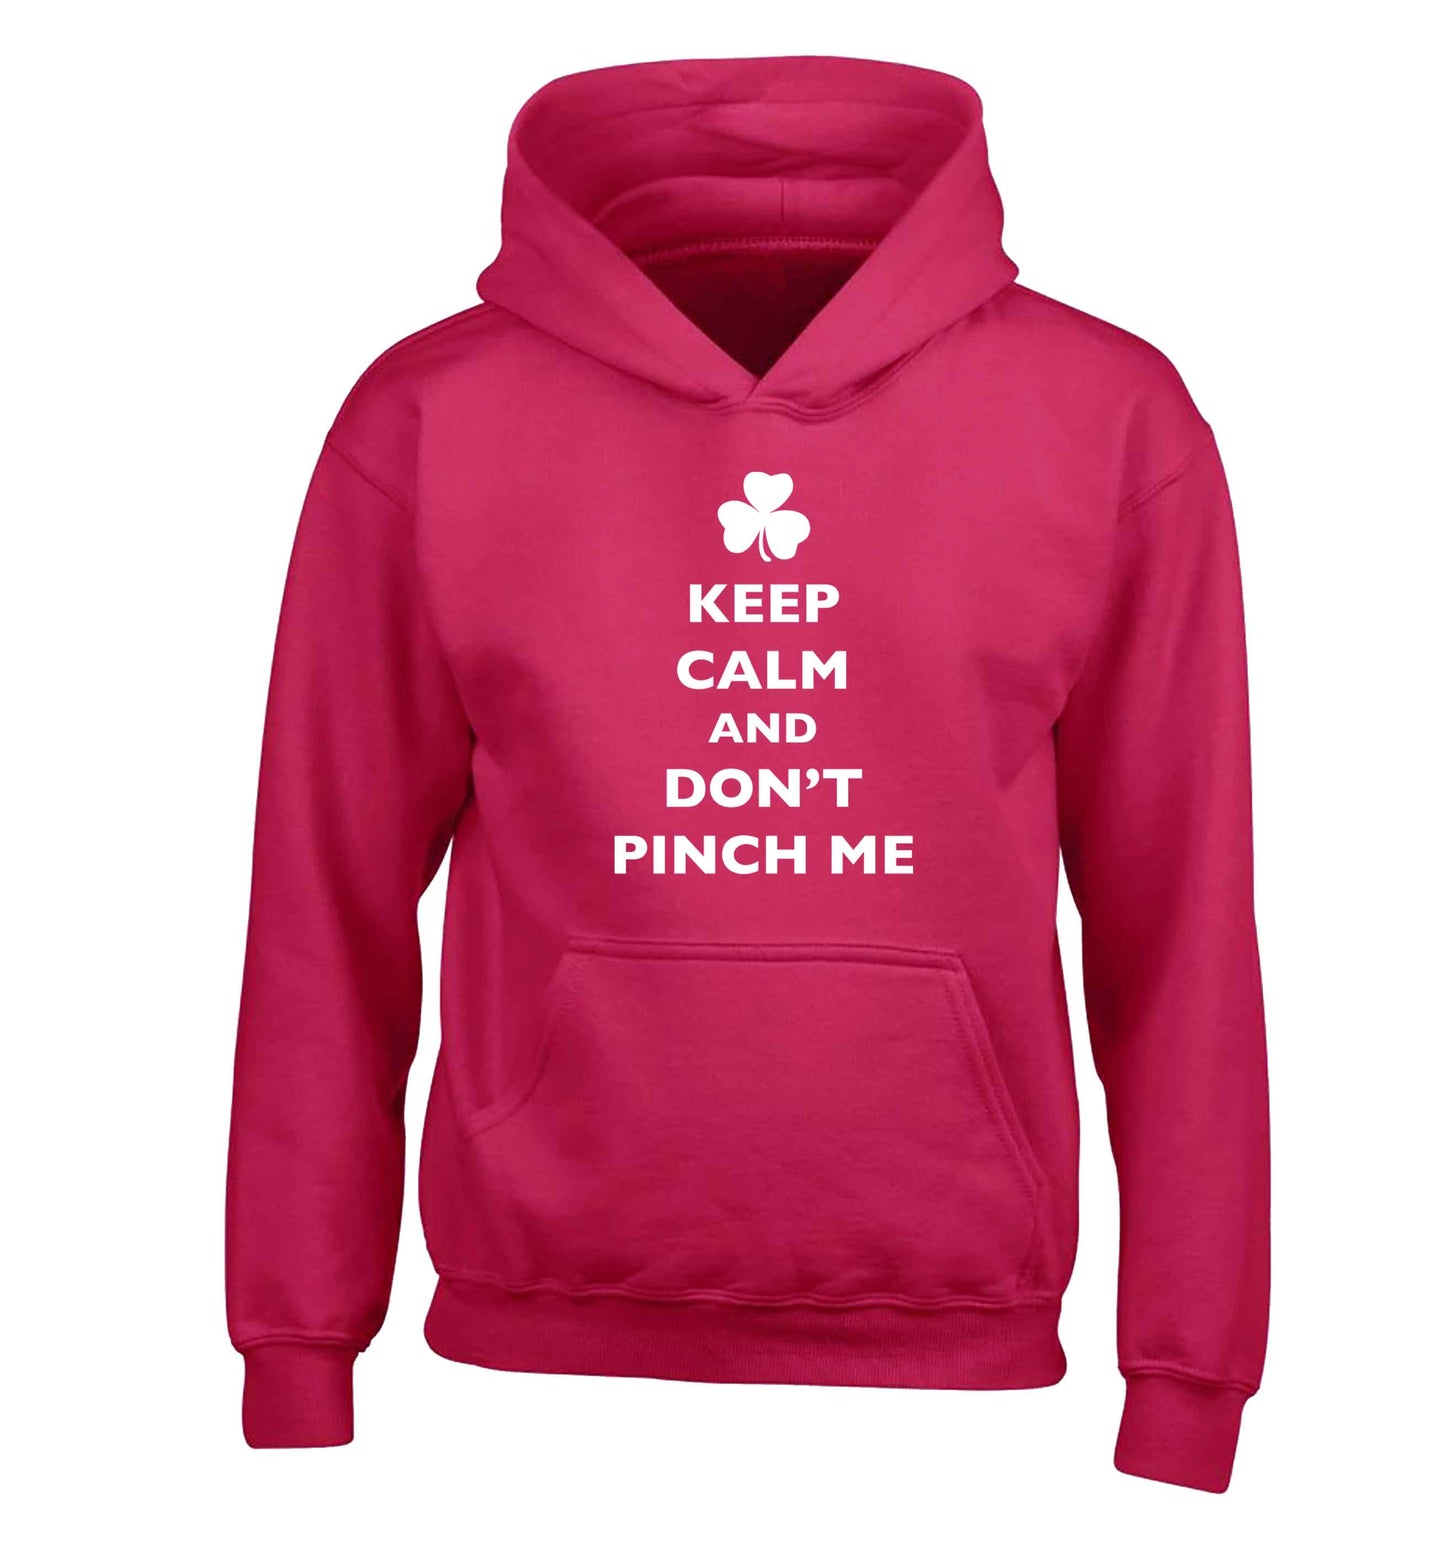 Keep calm and don't pinch me children's pink hoodie 12-13 Years